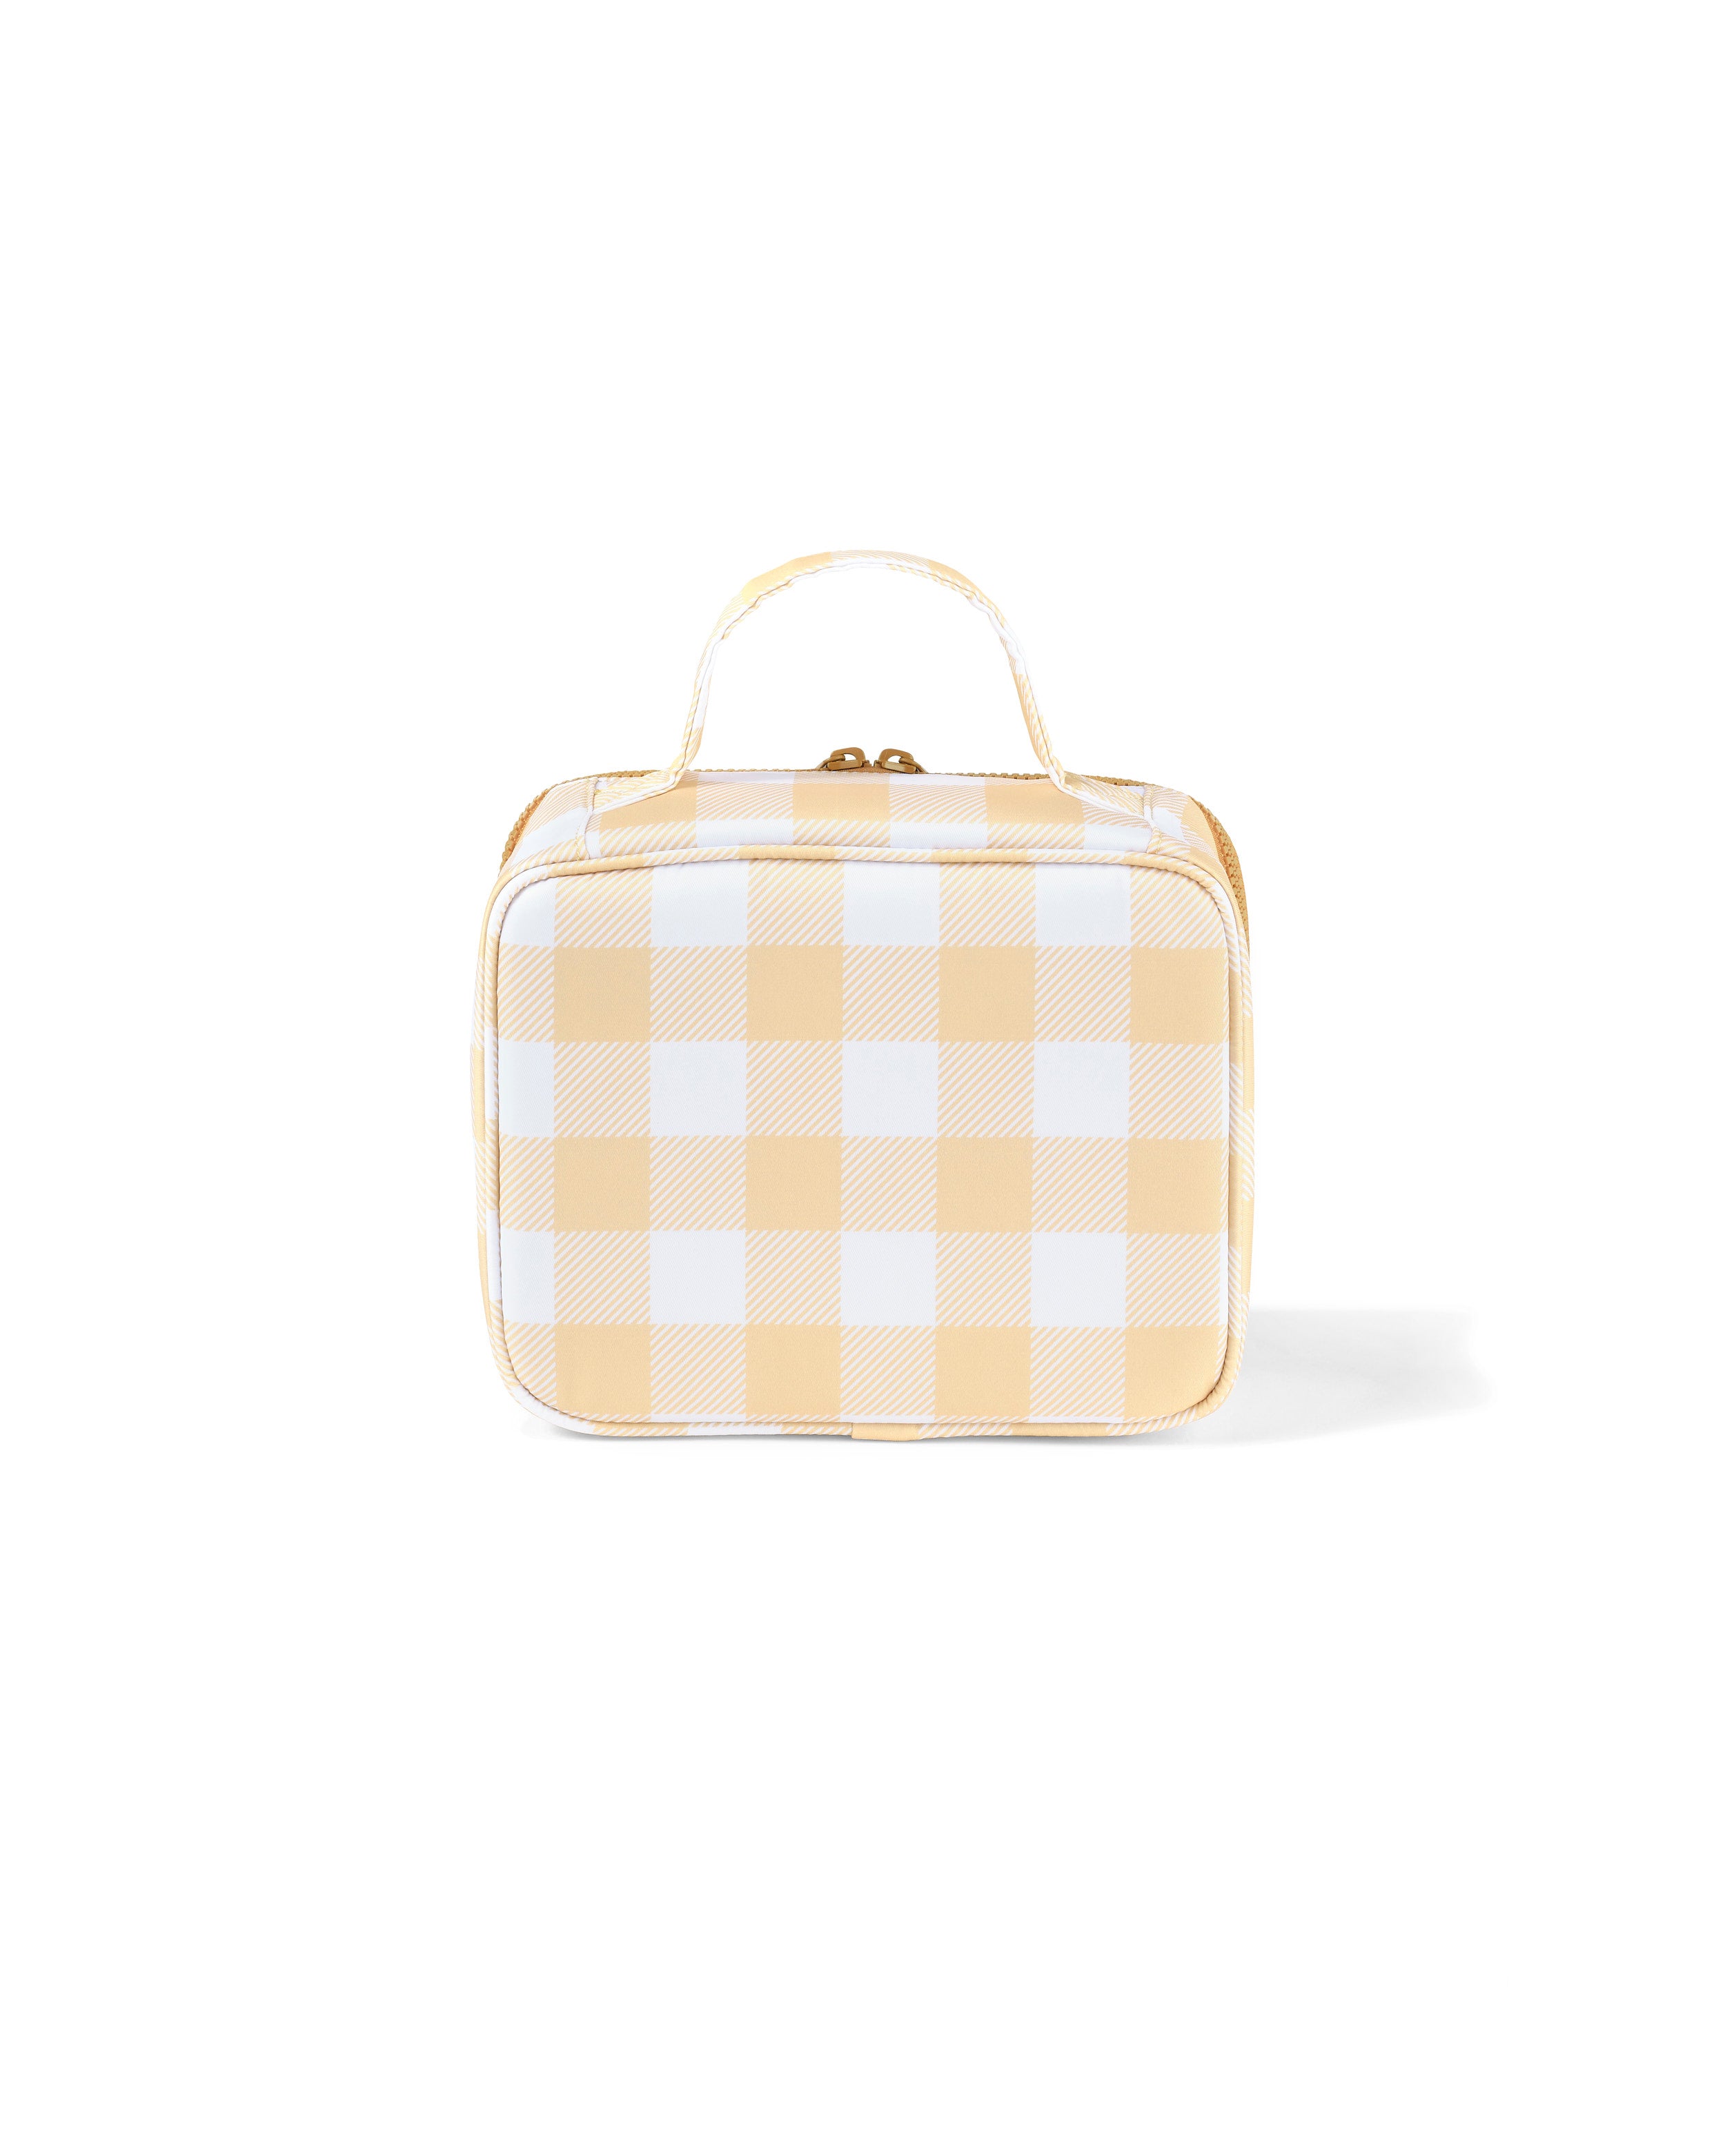 OiOi Mini Insulated Lunch Bag - Beige Gingham